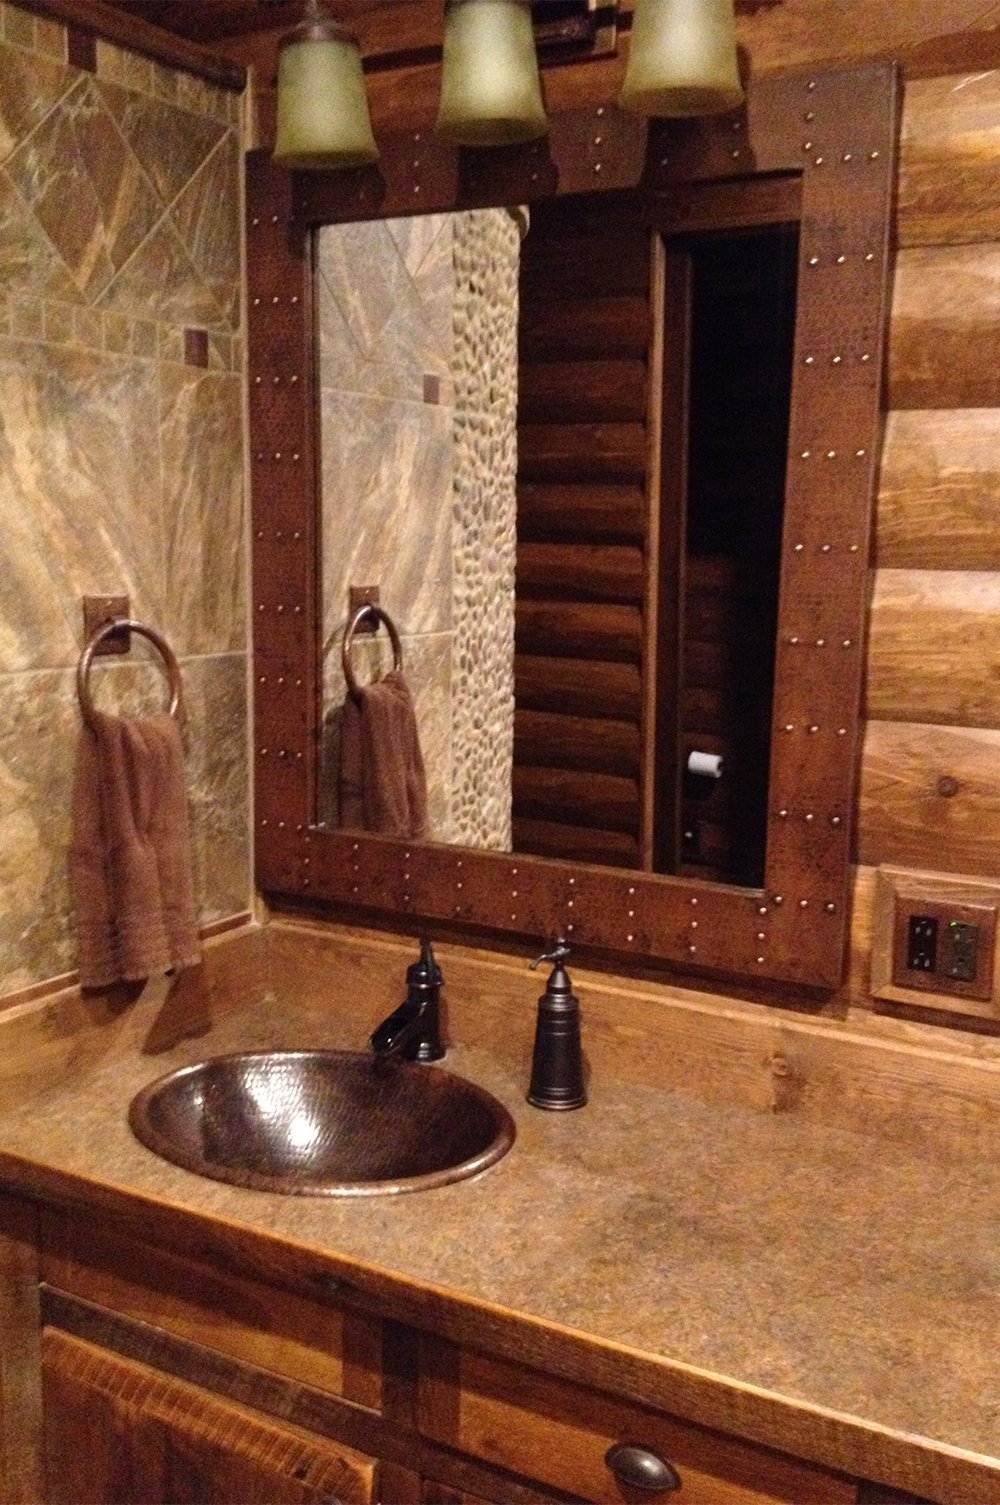 36" Rectangle Hammered Copper Mirror with rivet embellishments in a log cabin bathroom